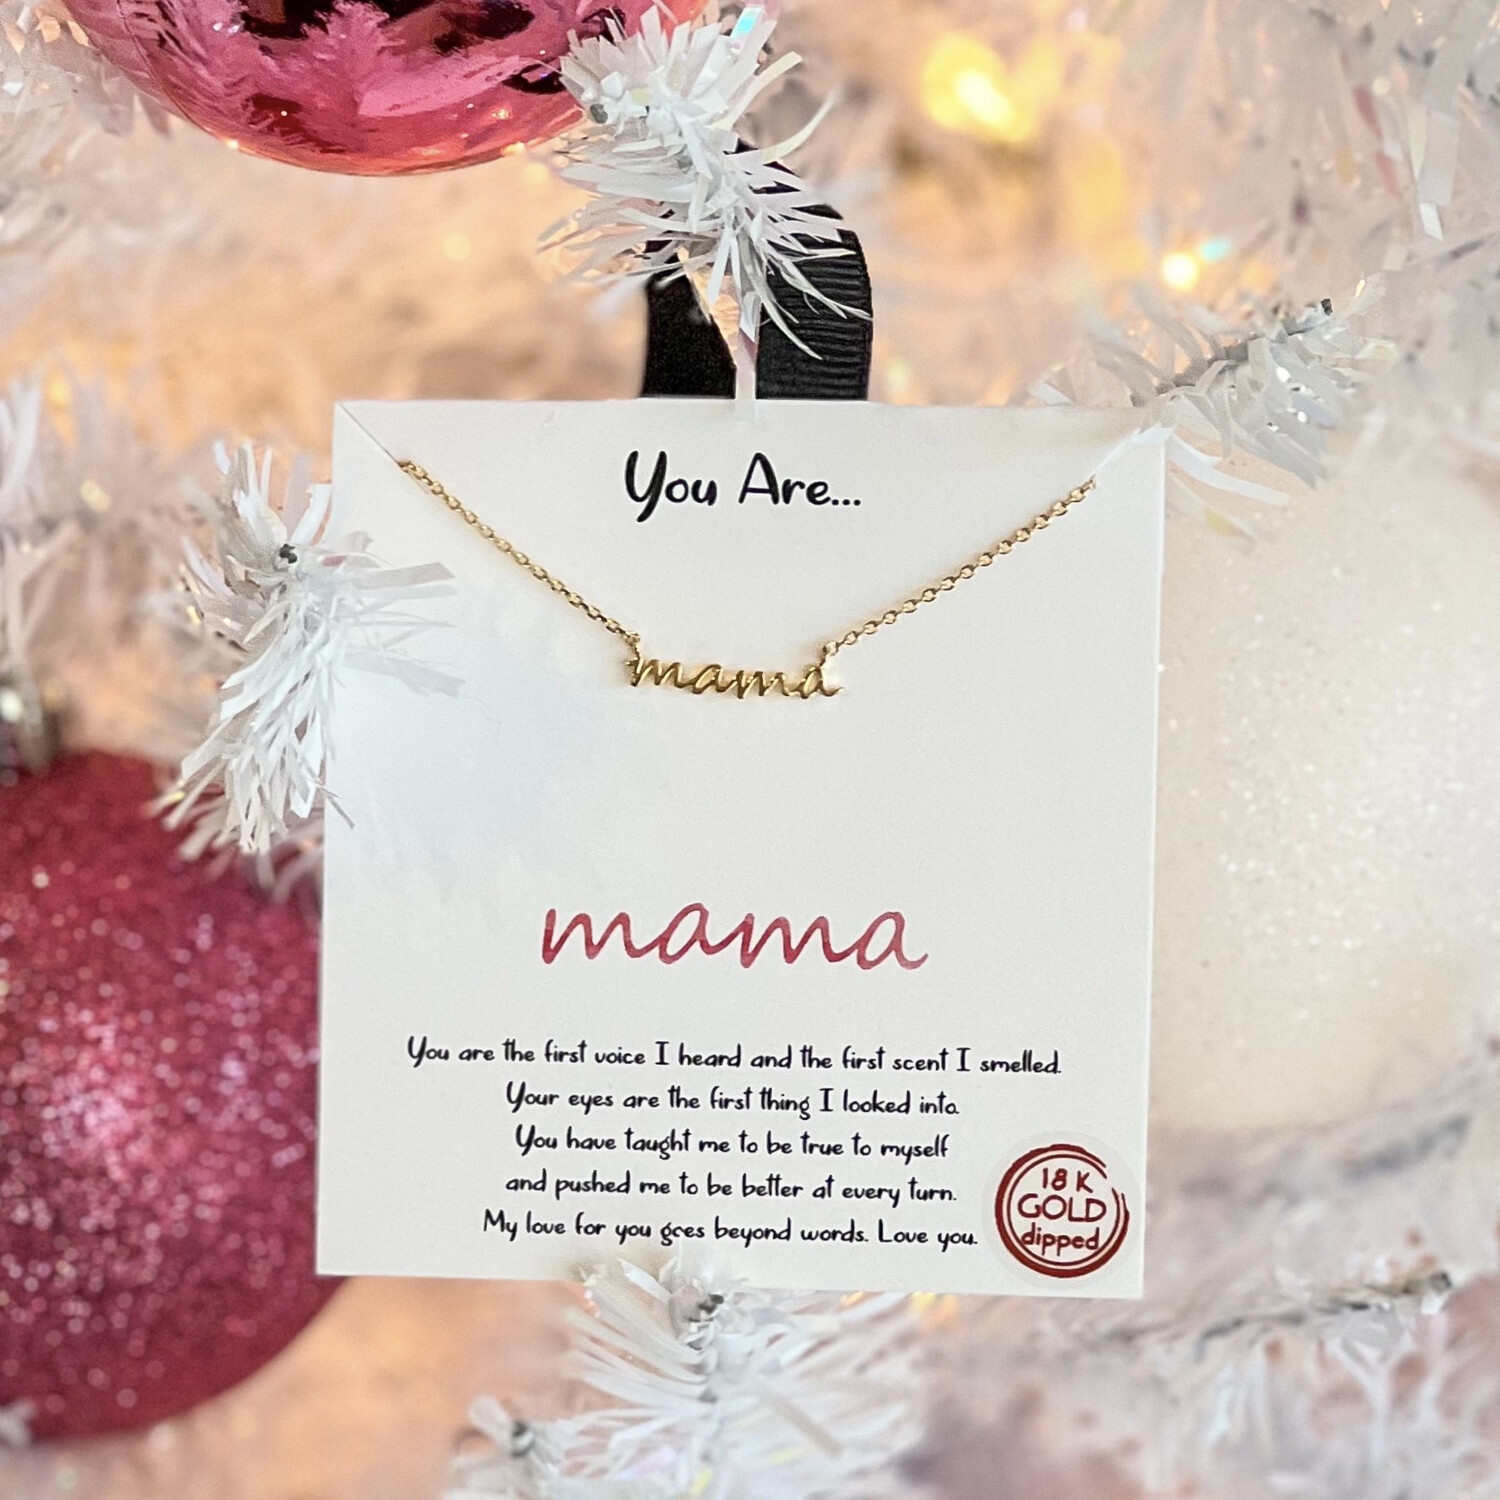 You Are.. Mama Necklace - Gold